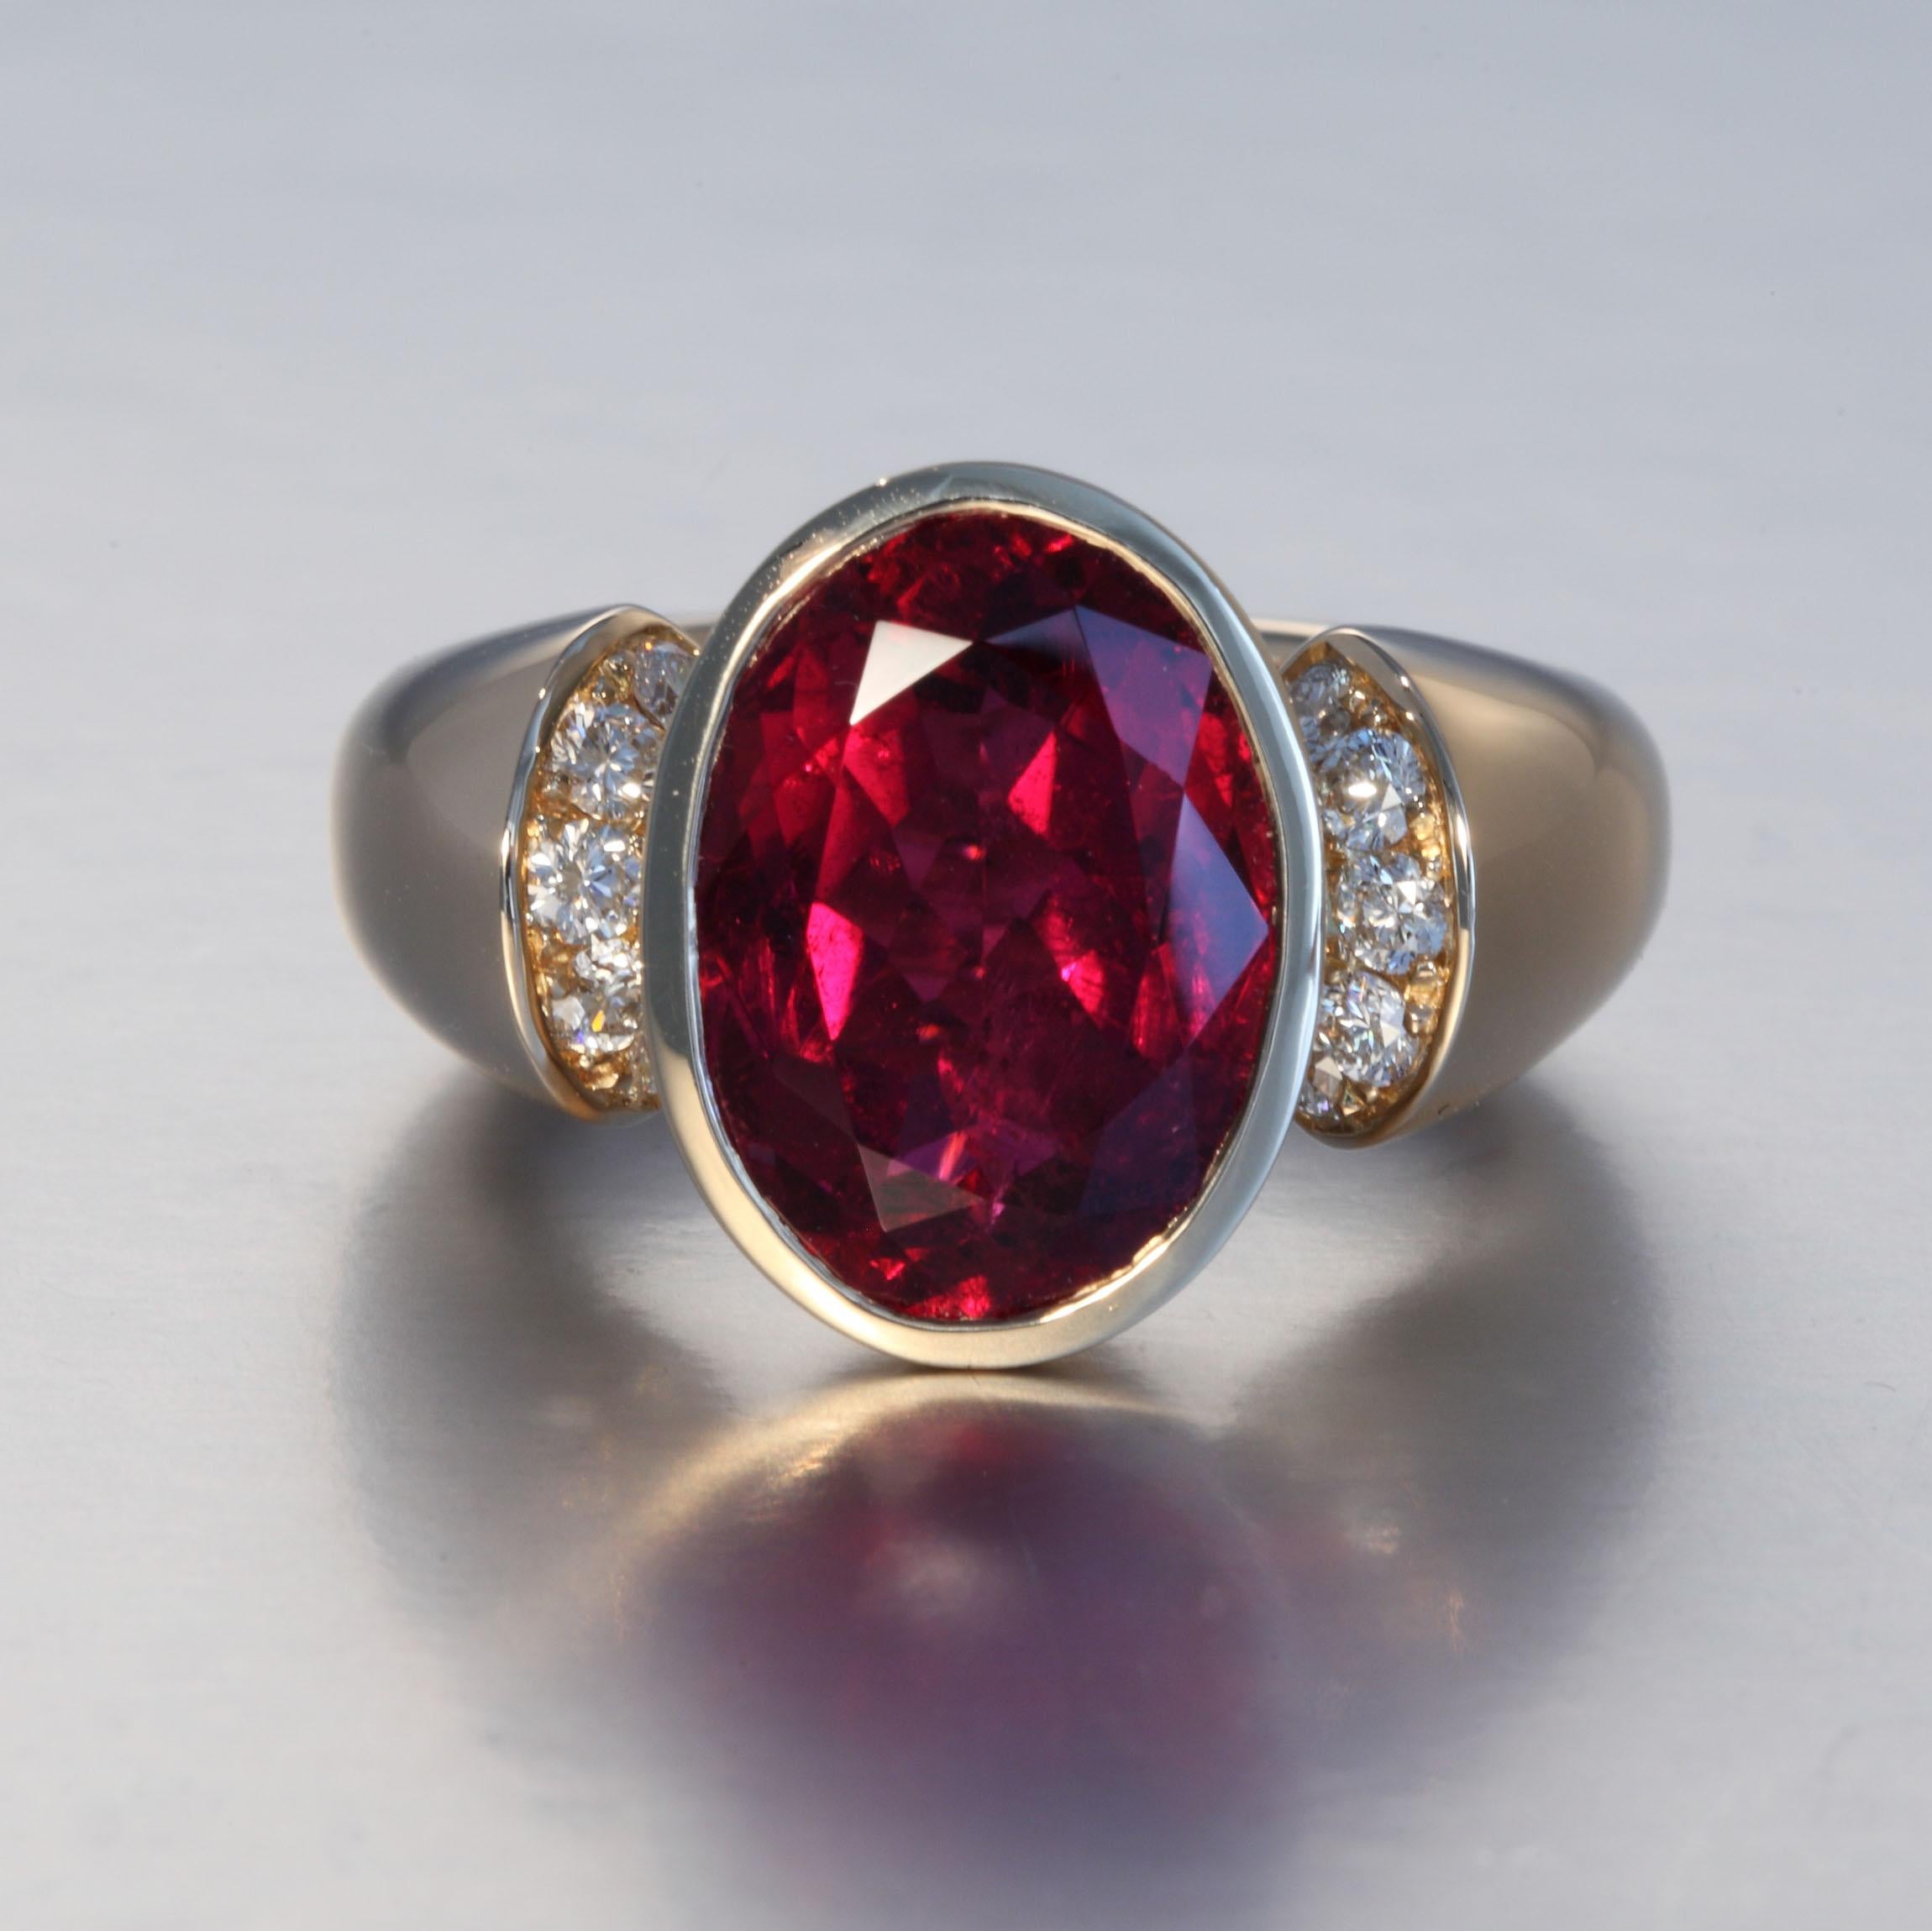 Robert Vogelsang 6.39 Carat Rubelite Tourmaline Diamond Rose Gold Cocktail Ring In New Condition For Sale In Zurich, CH